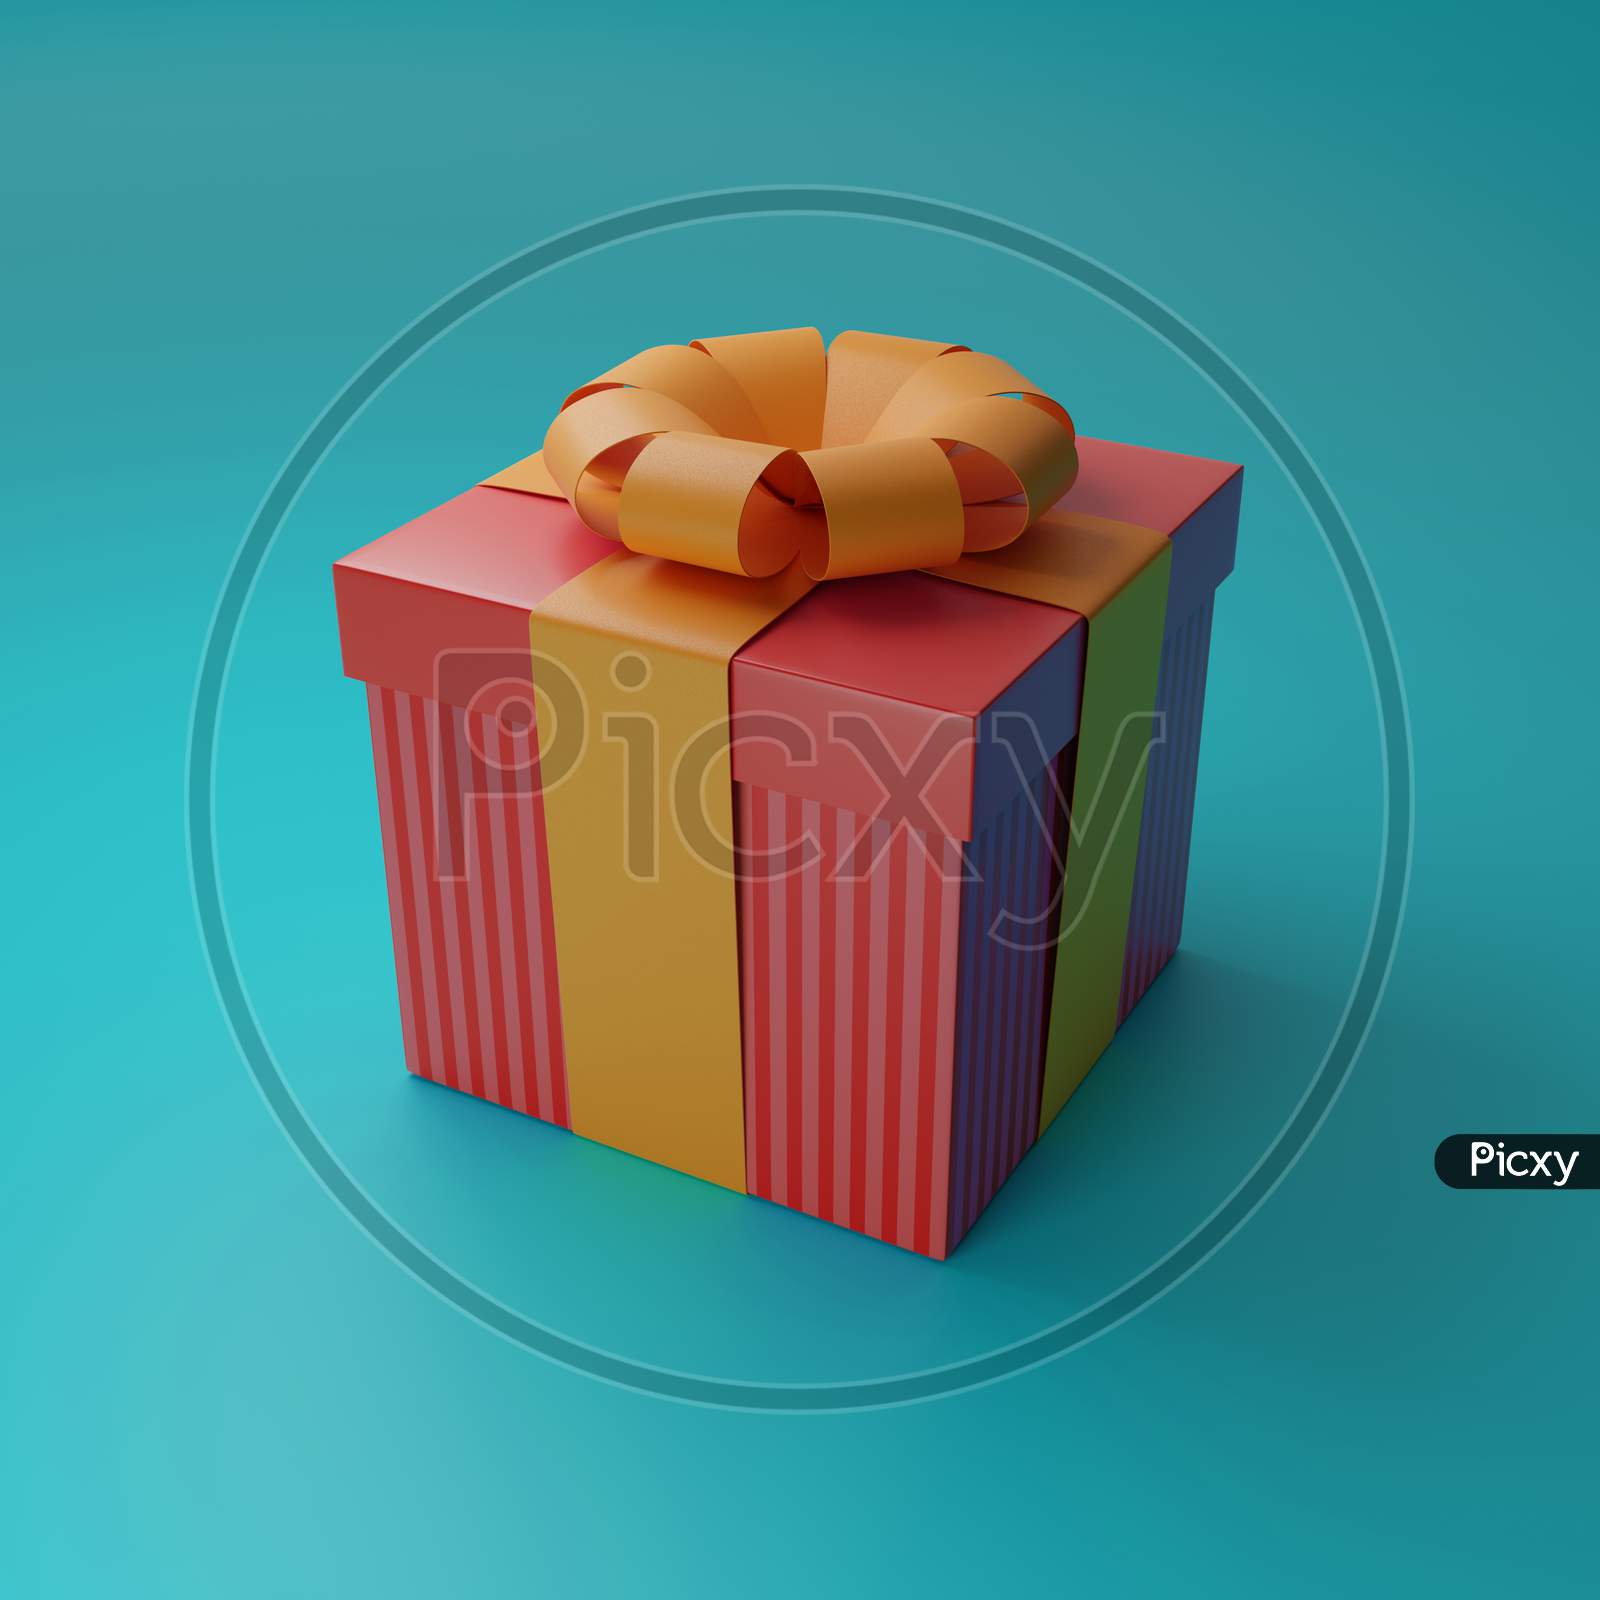 3D Render Of A Striped Red Gift Box With An Orange Ribbon On A Blue Background